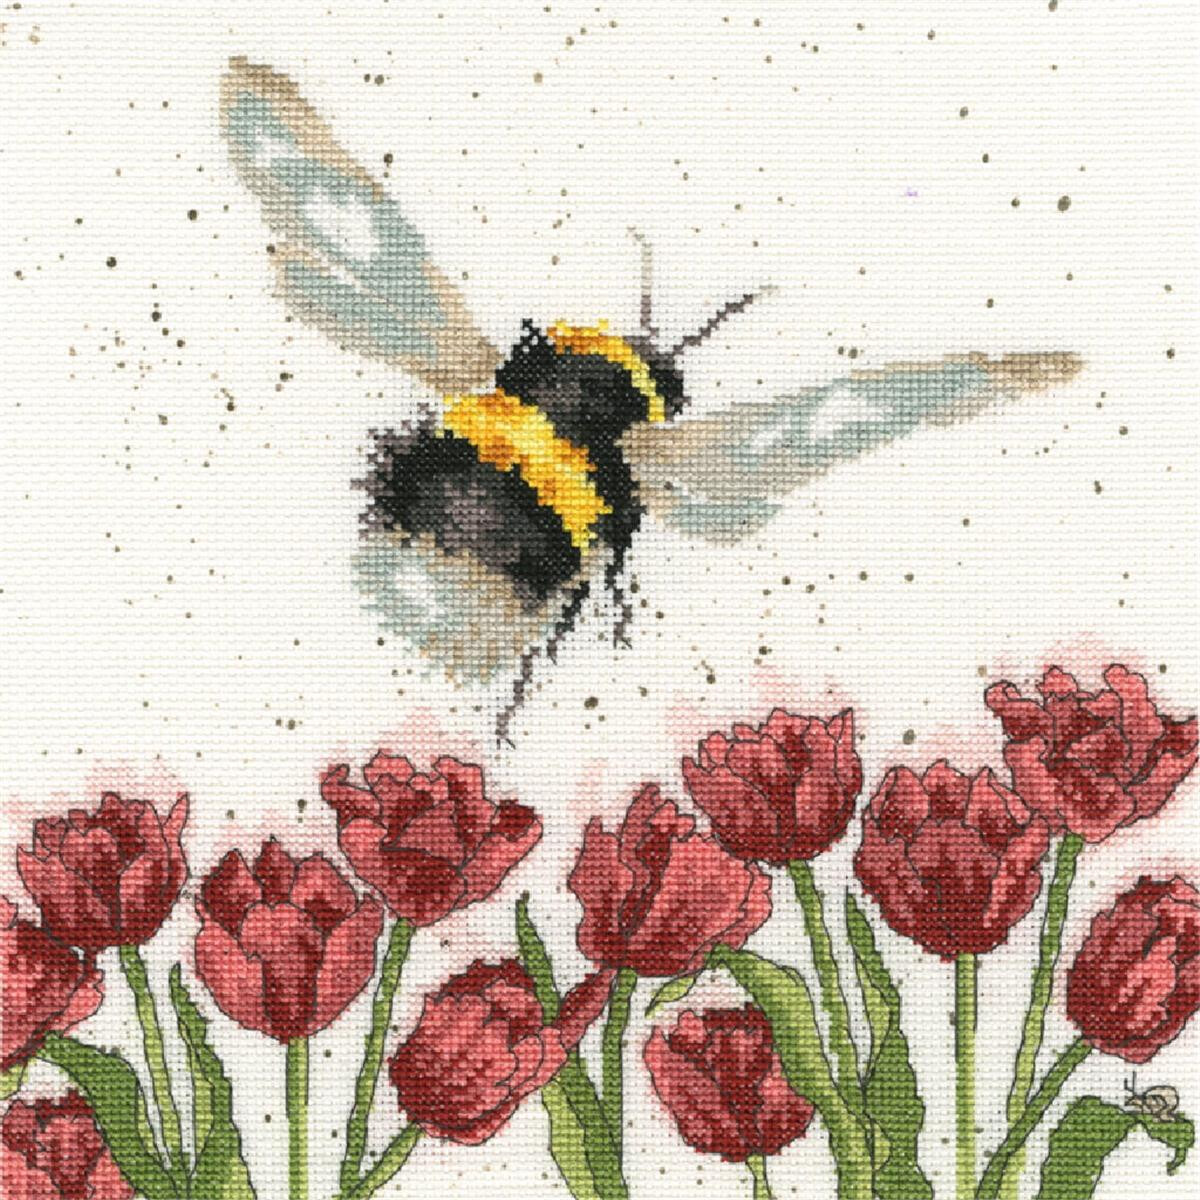 An embroidery pack from Bothy Threads shows a large bee...